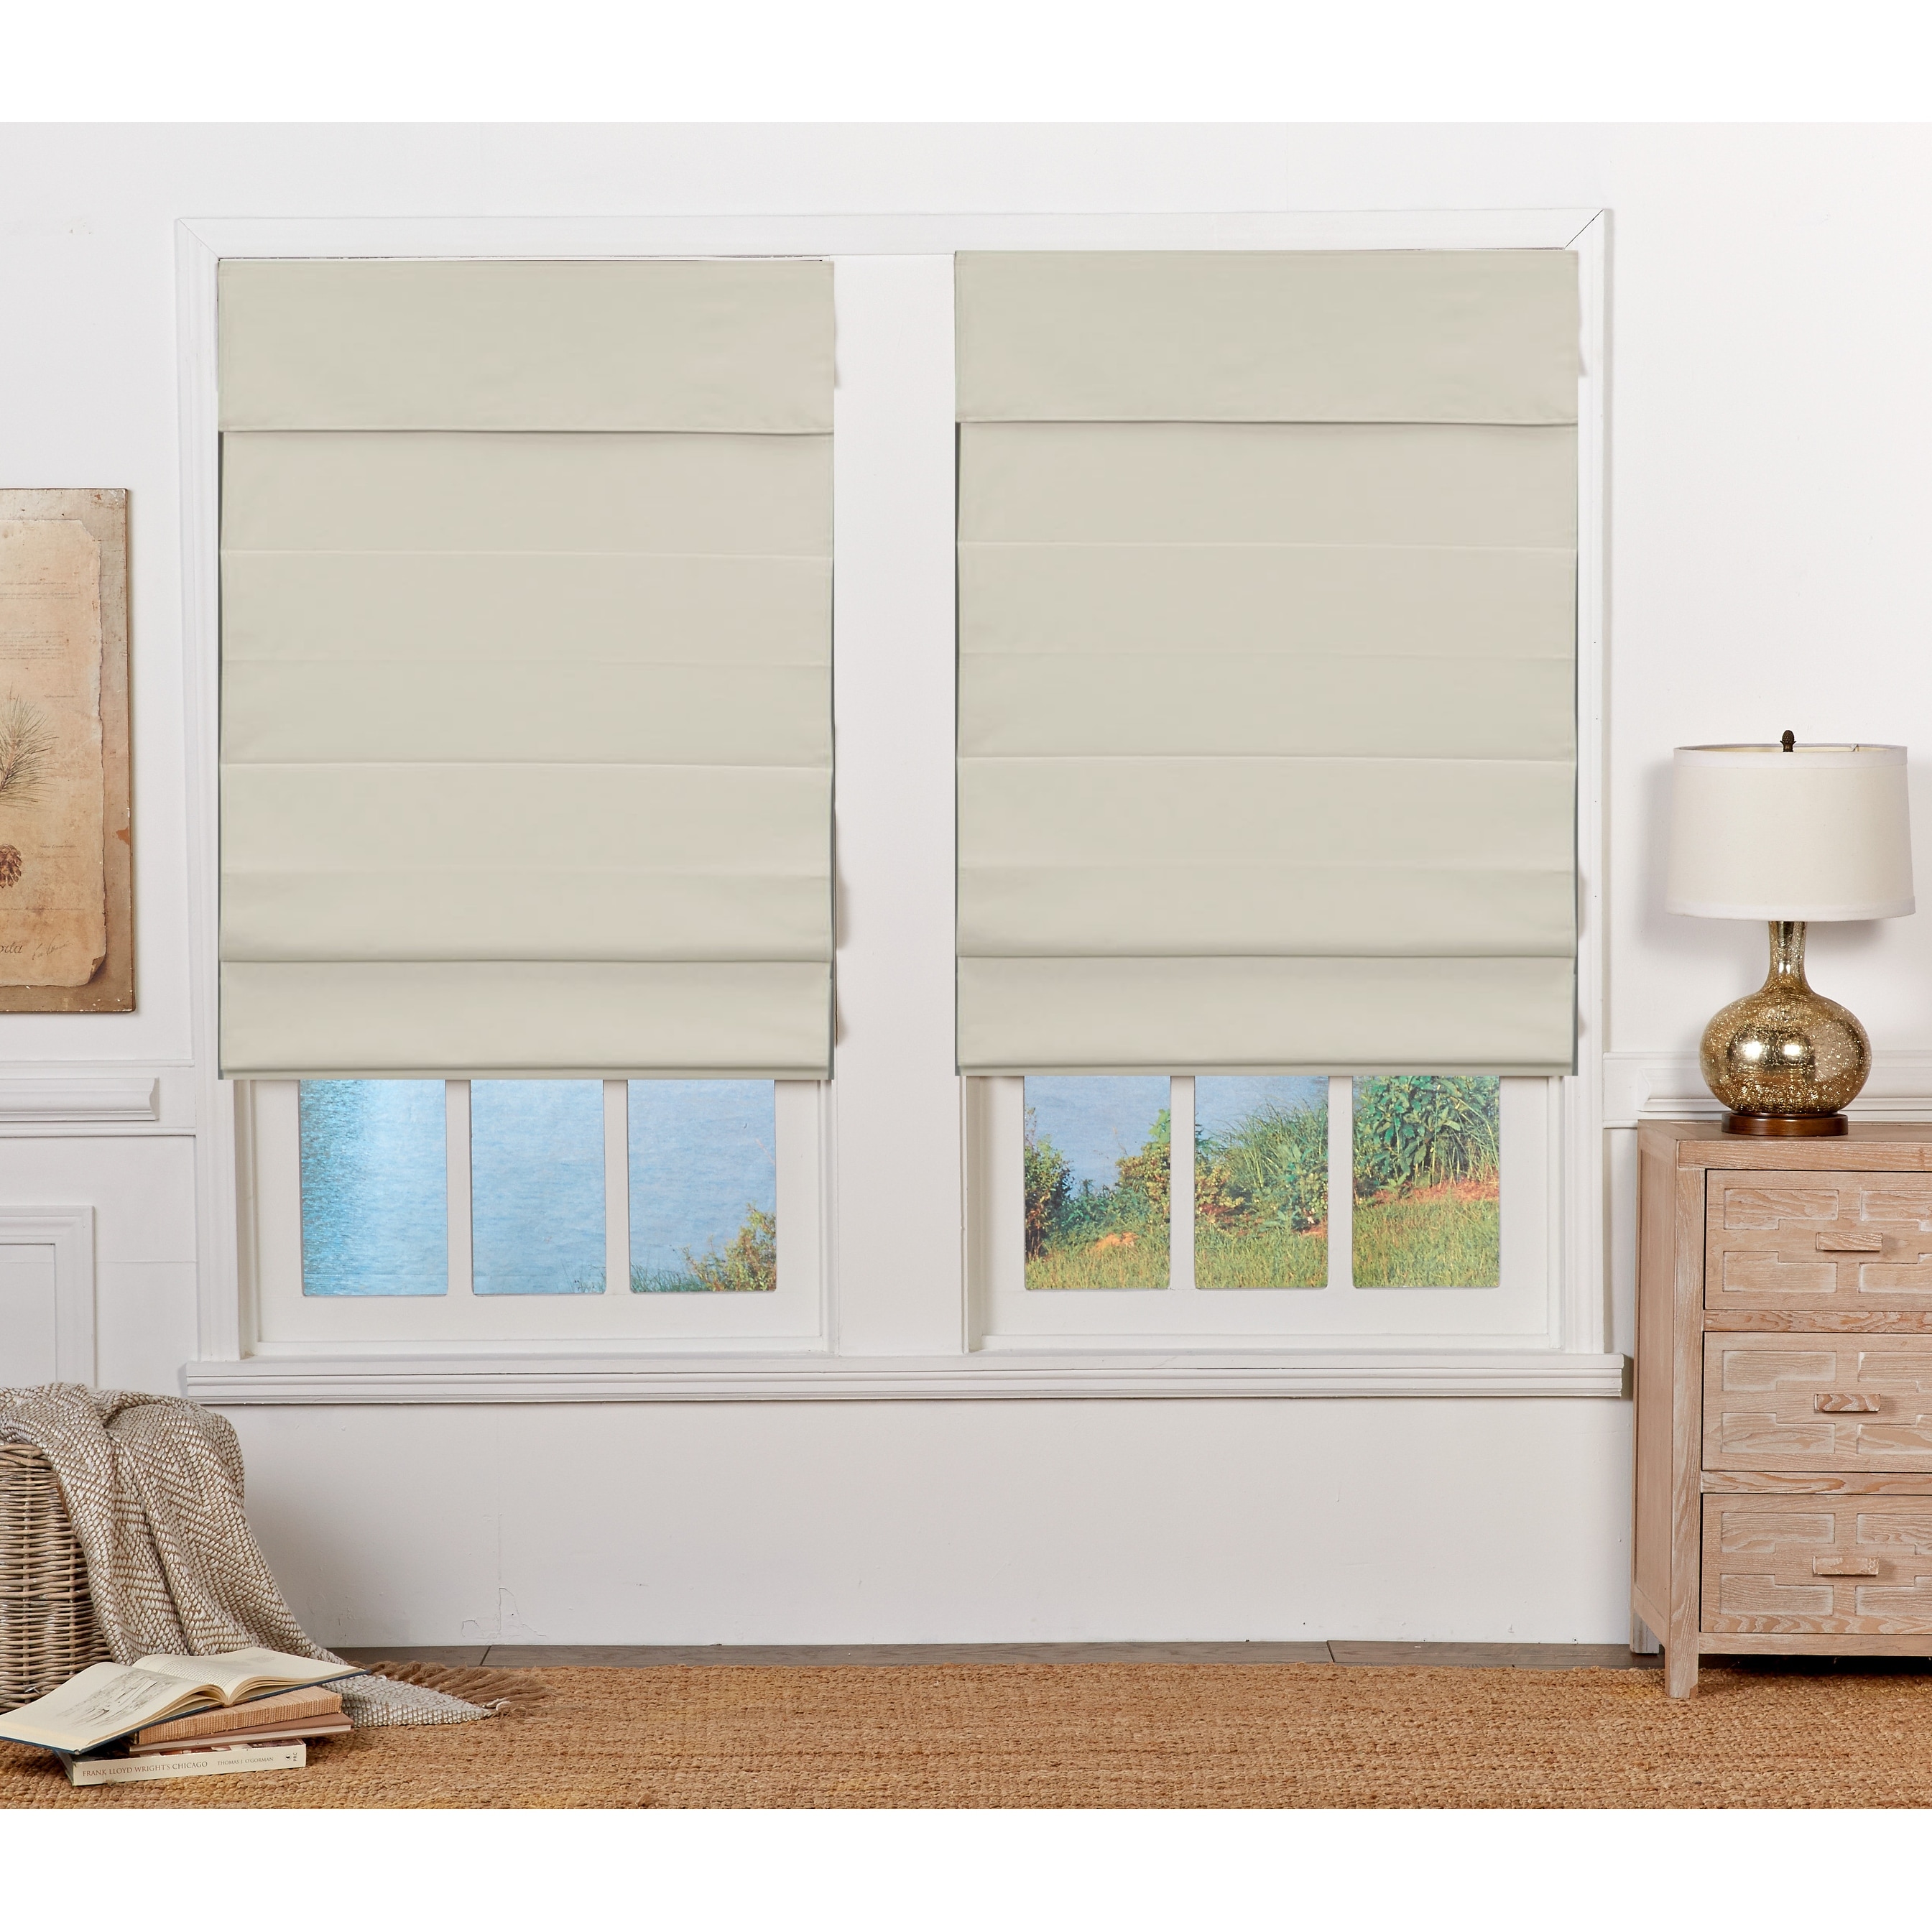 50 - 59 Inches Window Shades - Bed Bath & Beyond